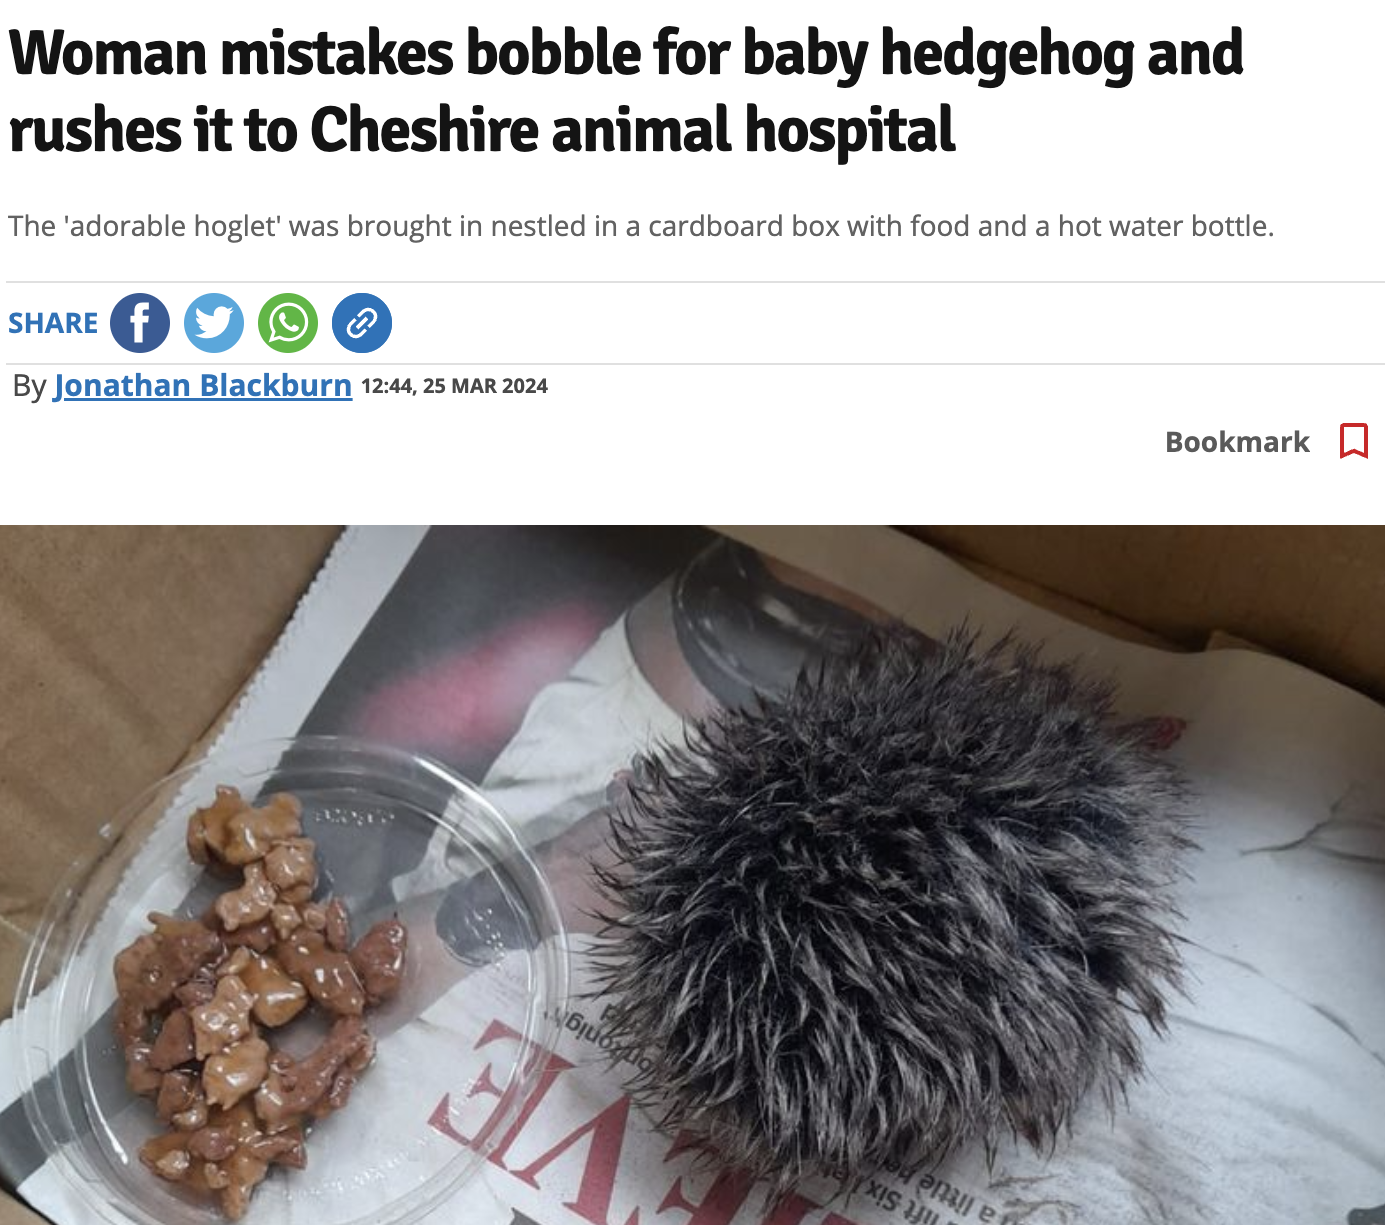 sea urchin - Woman mistakes bobble for baby hedgehog and rushes it to Cheshire animal hospital The 'adorable hoglet' was brought in nestled in a cardboard box with food and a hot water bottle. f By Jonathan Blackburn , enue Kis R Bookmark